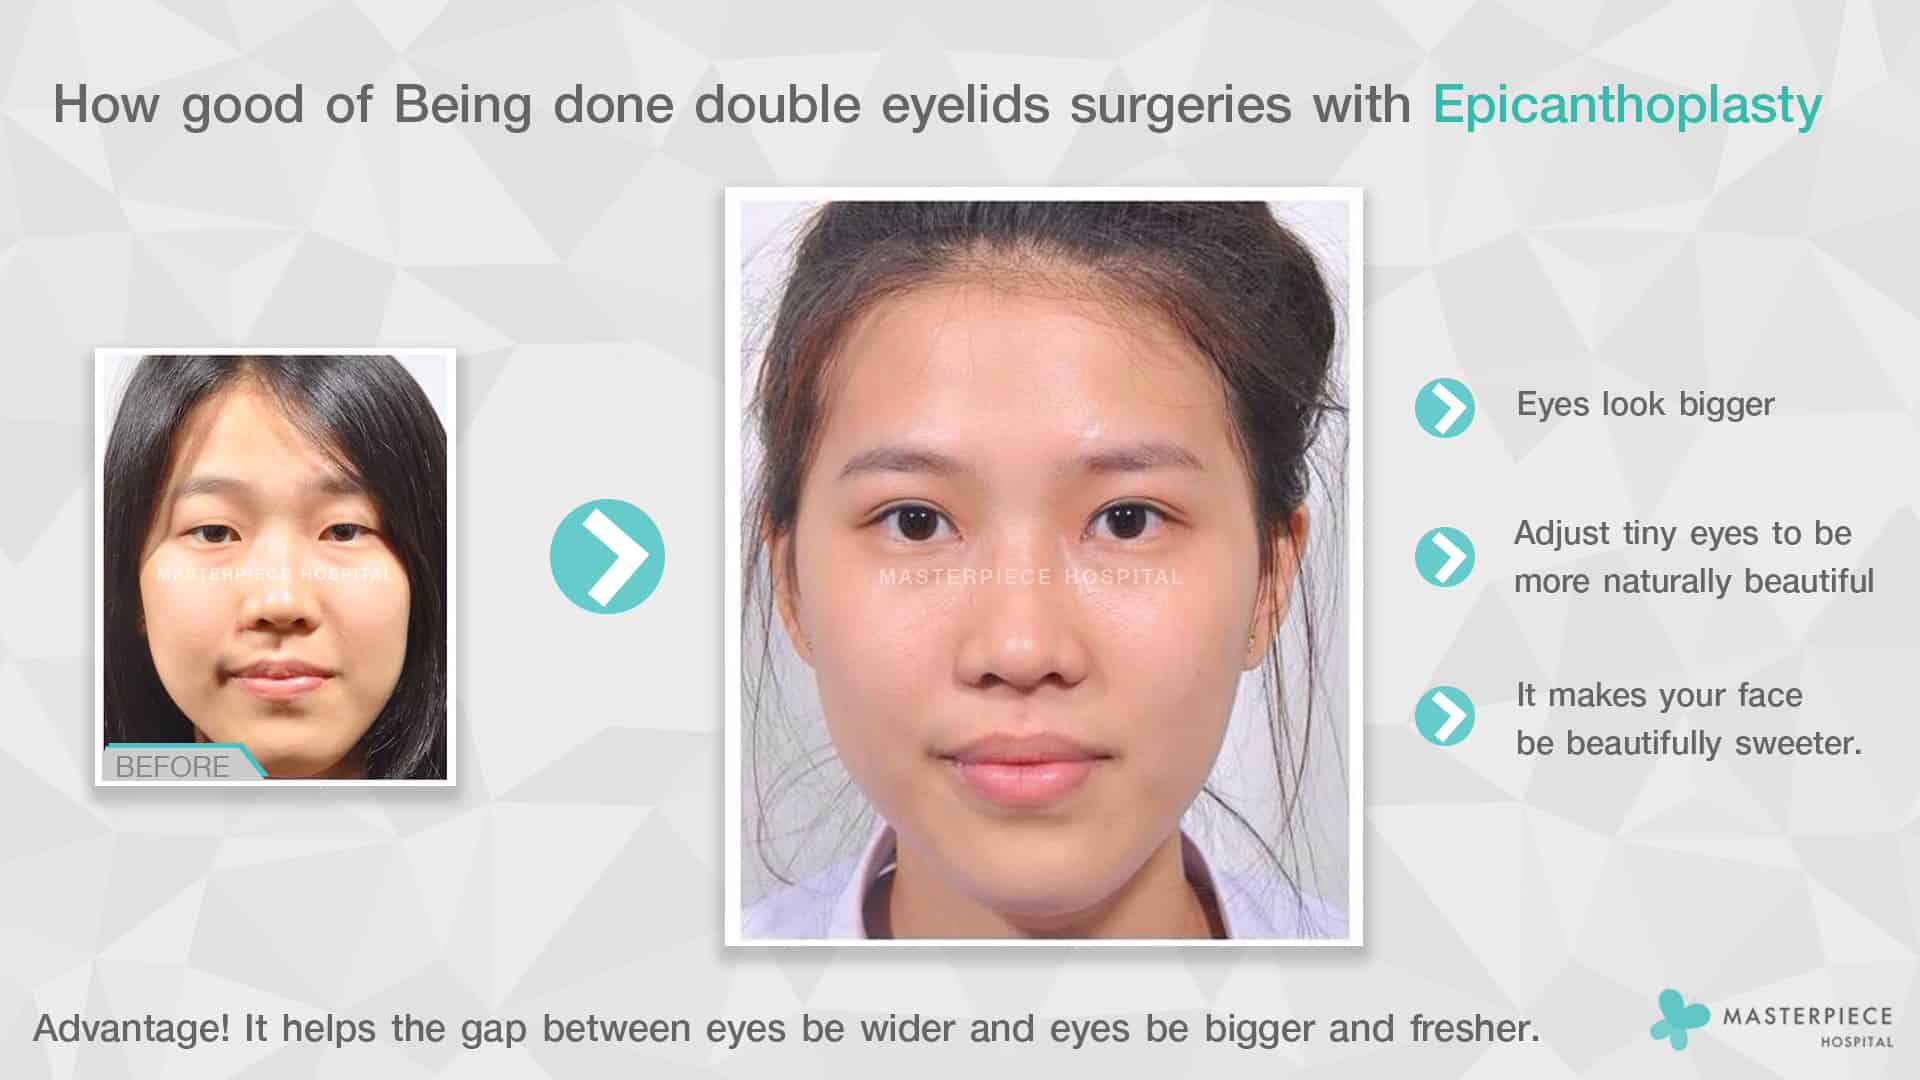 How good of Being done double eyelids surgeries with Epicanthoplasty